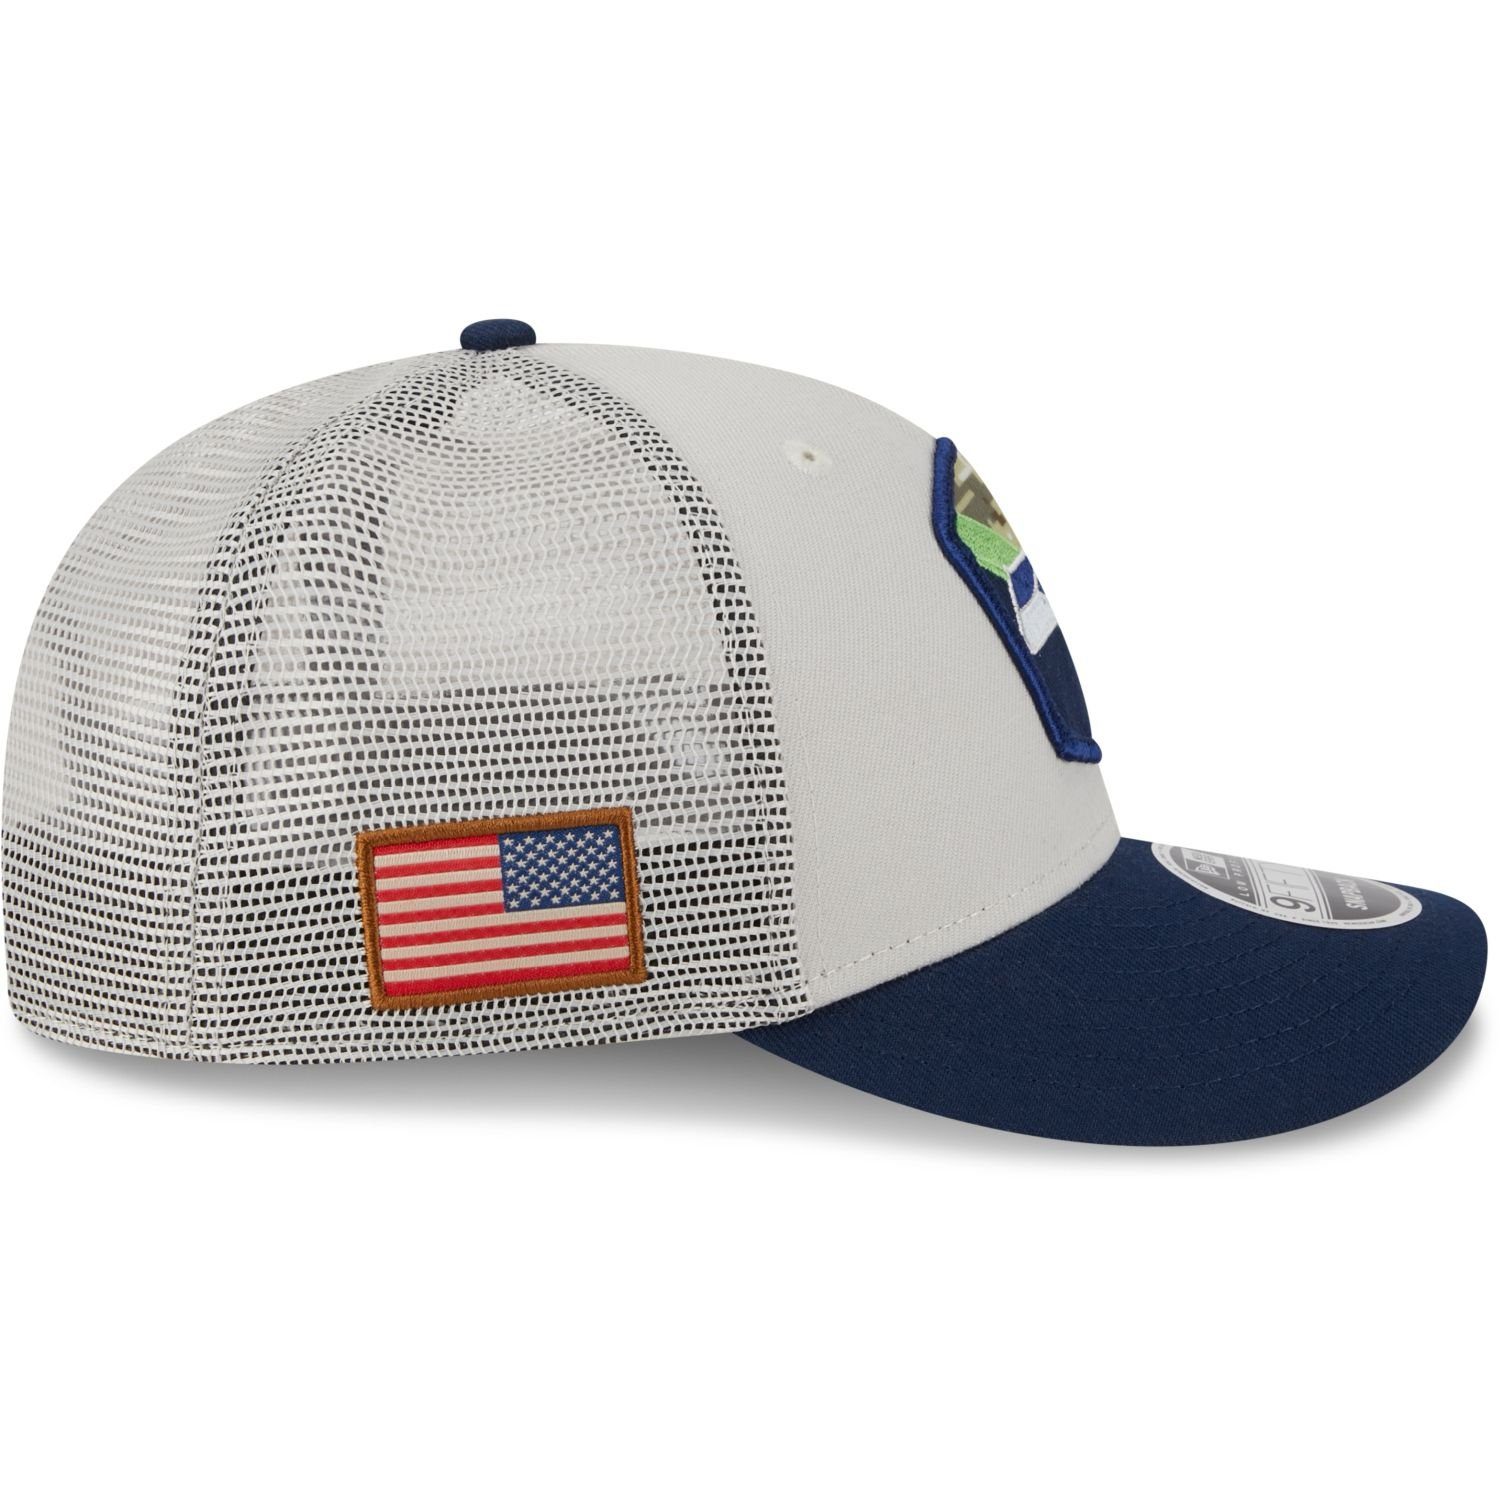 Low Snapback Cap New Era Seattle Service to 9Fifty Snap Salute Seahawks Profile NFL